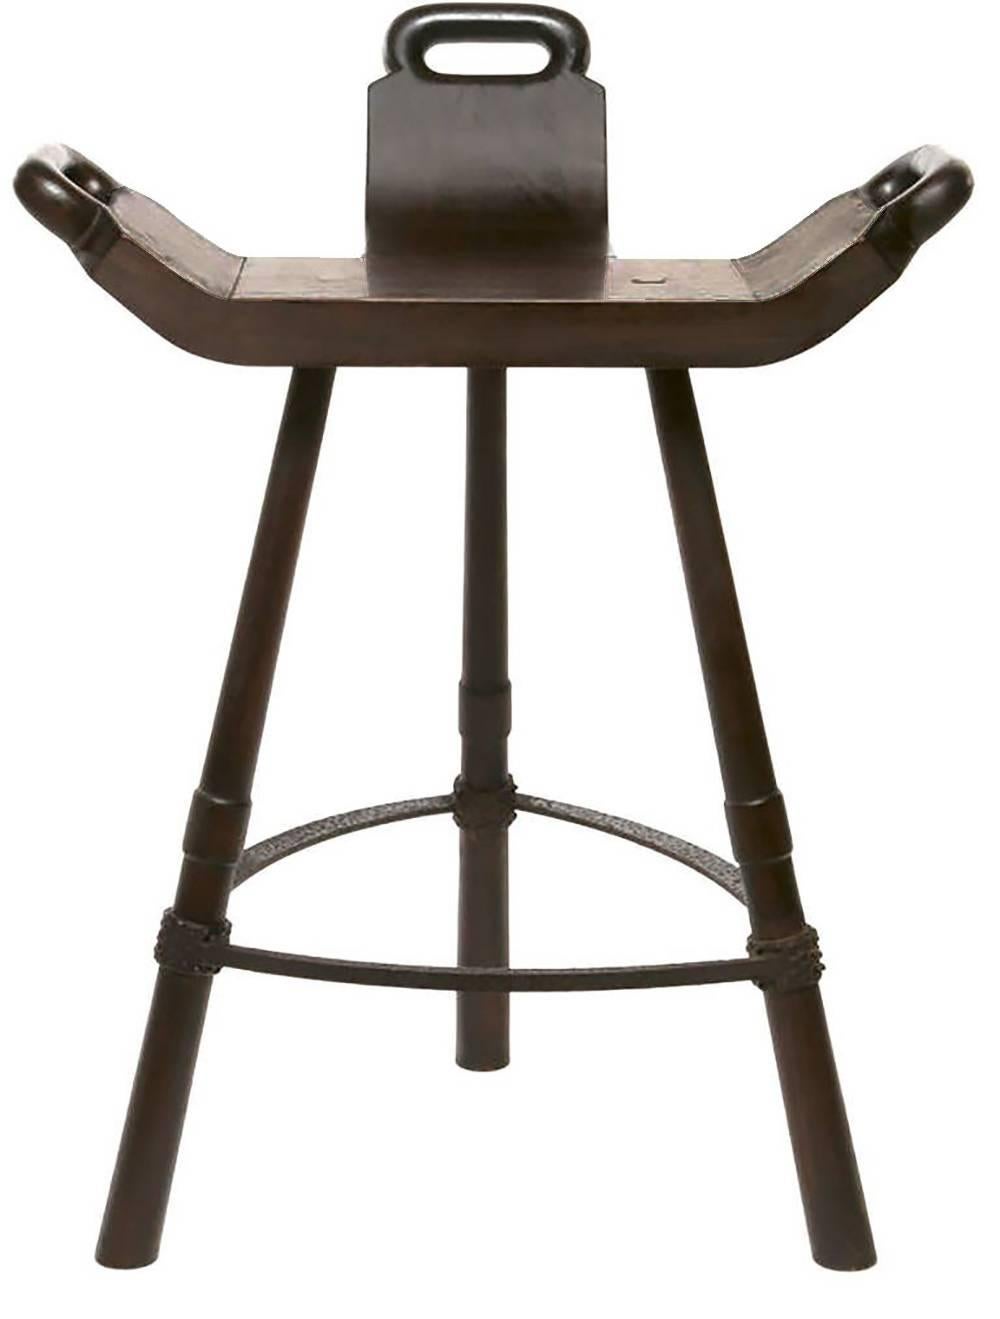 Pair of tripod-base bar stools with seats inspired by Primitive birthing chairs. Hand-hammered iron stretchers with Brutalist texture, and walnut wood legs and seats. Seats have integral back support and hand grips.